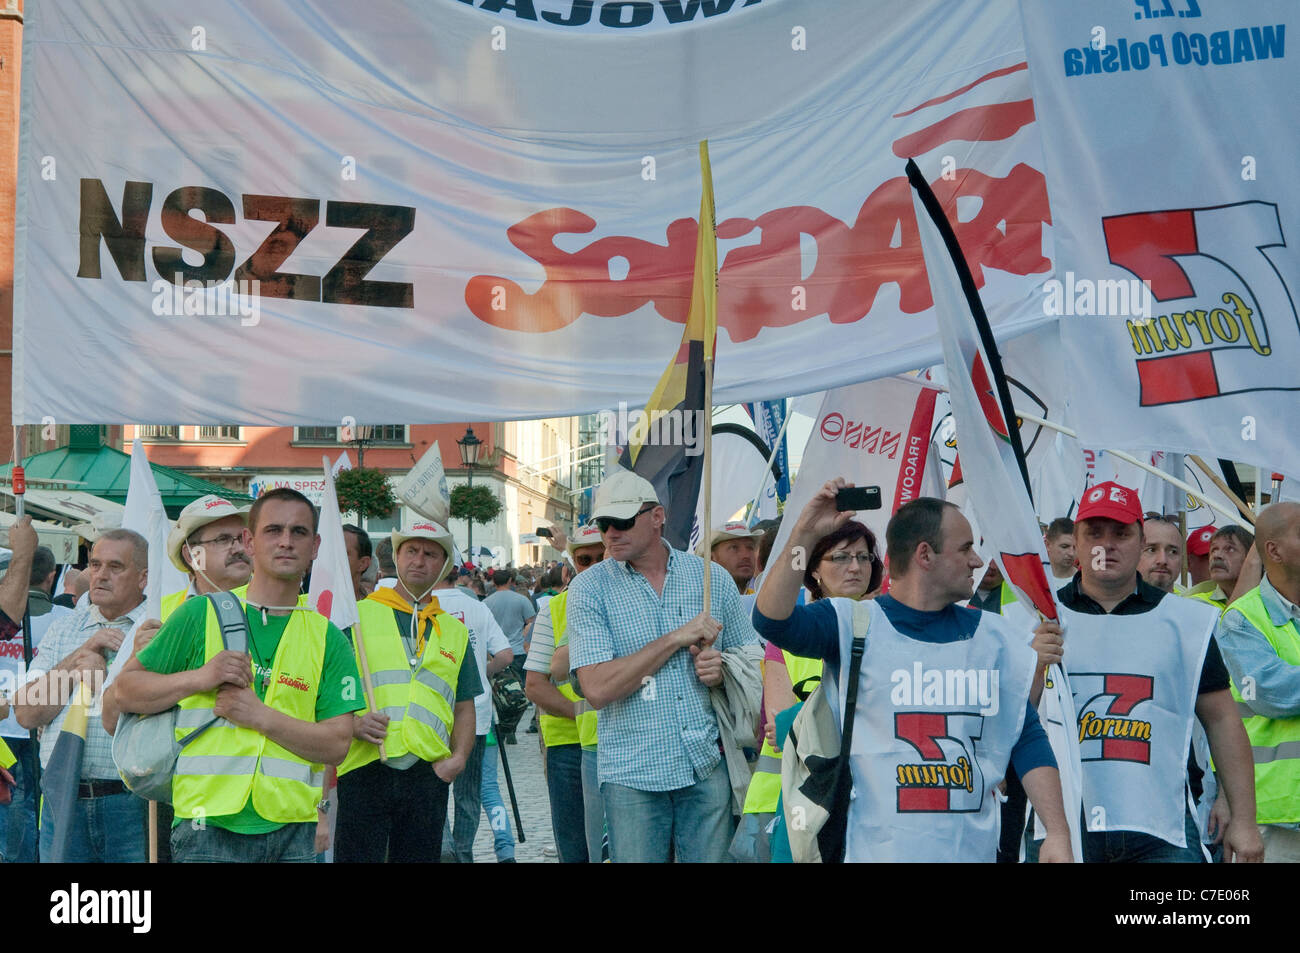 Solidarity members, European trade unions demonstration during meeting of EU finance ministers on Sep 17, 2011 in Wroclaw Poland Stock Photo